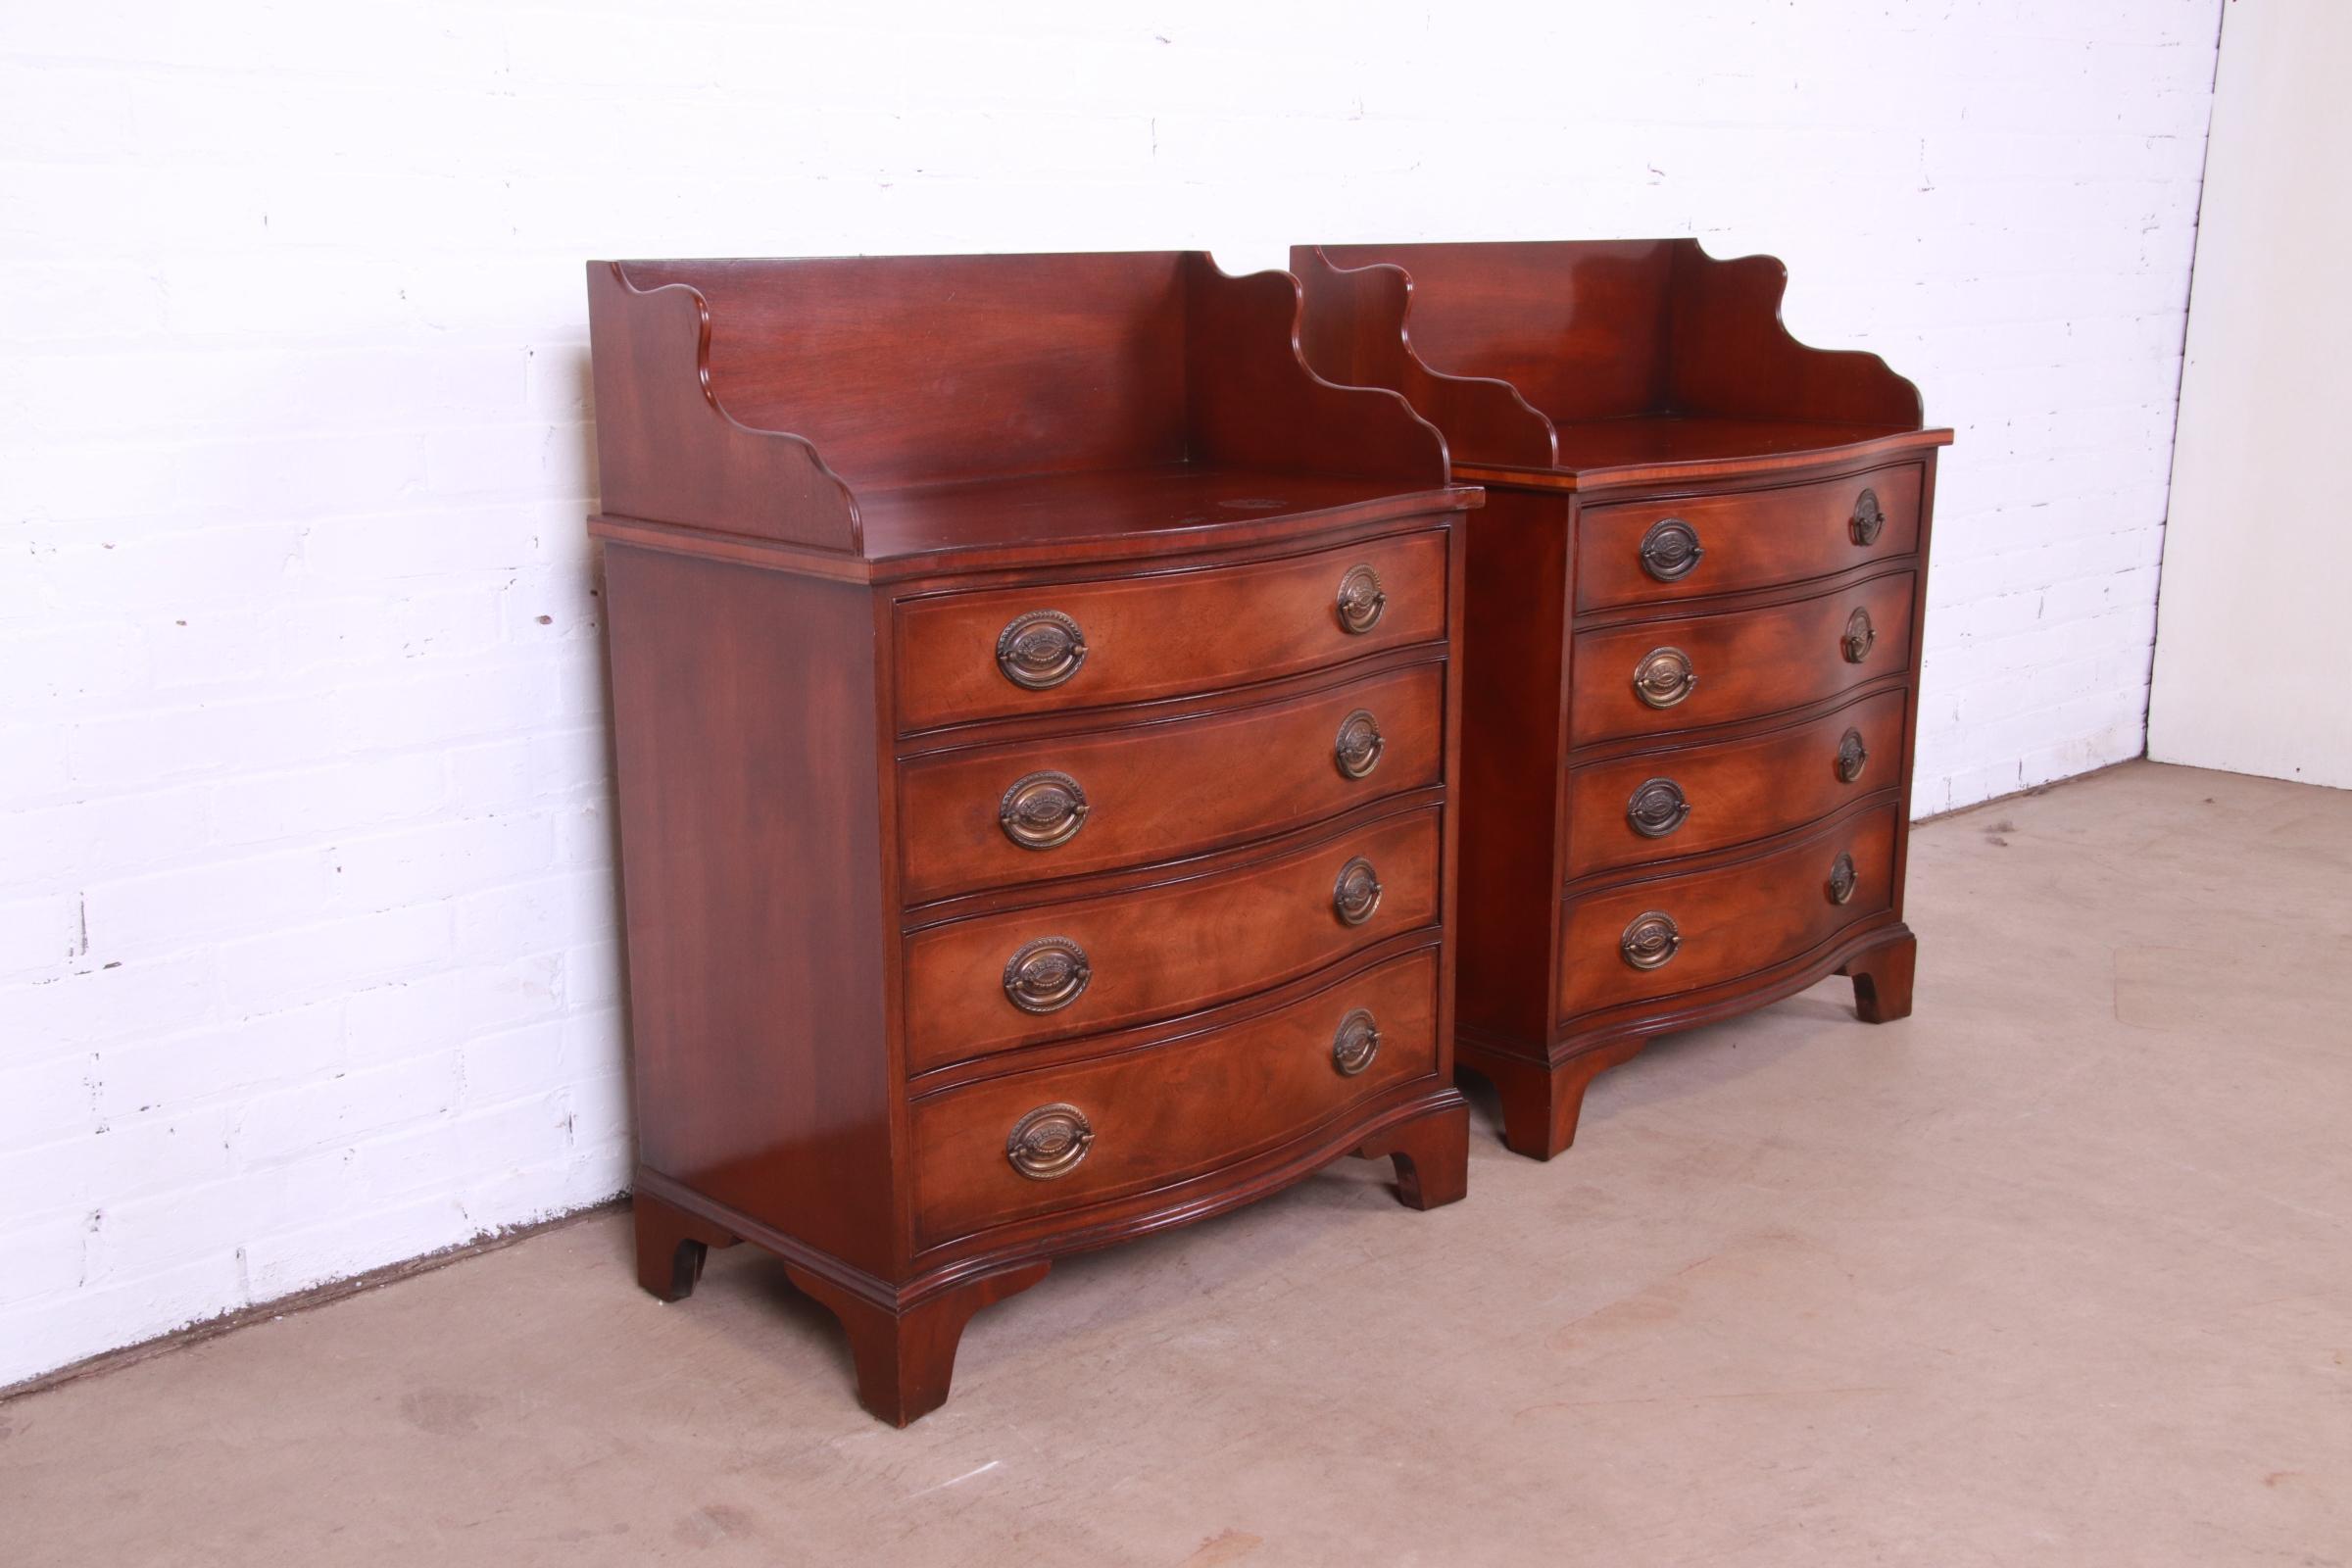 20th Century Henredon Georgian Inlaid Mahogany Serpentine Bachelor Chests or Nightstands For Sale